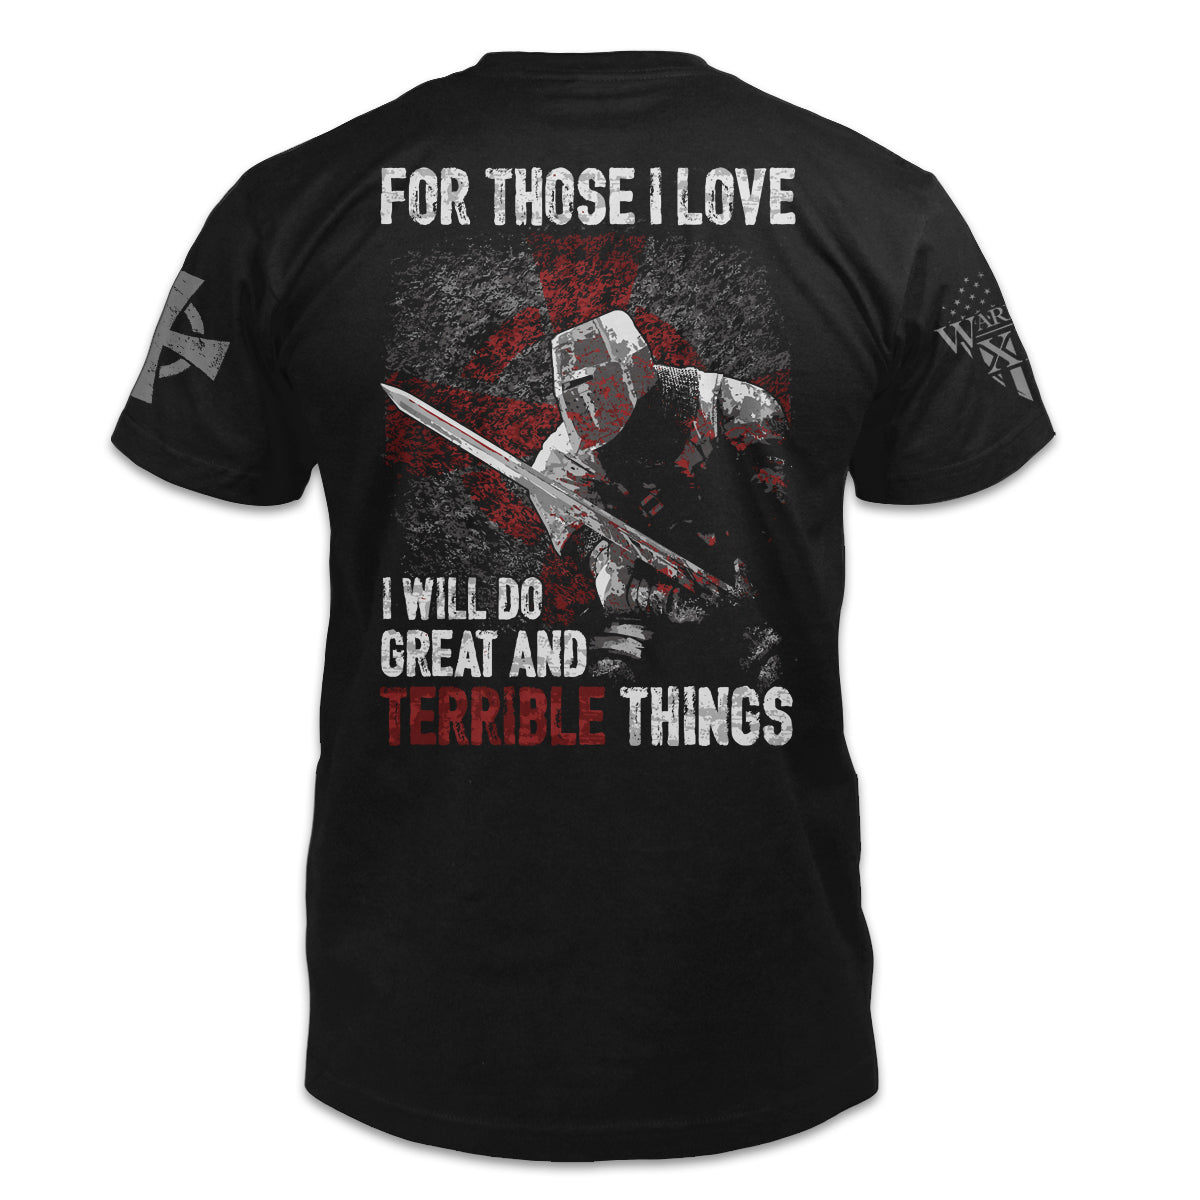 A black t-shirt with the words 'For Those I Love, I Will Do Great And Terrible Things" with a knights templar ready for battle printed on the back of the shirt.